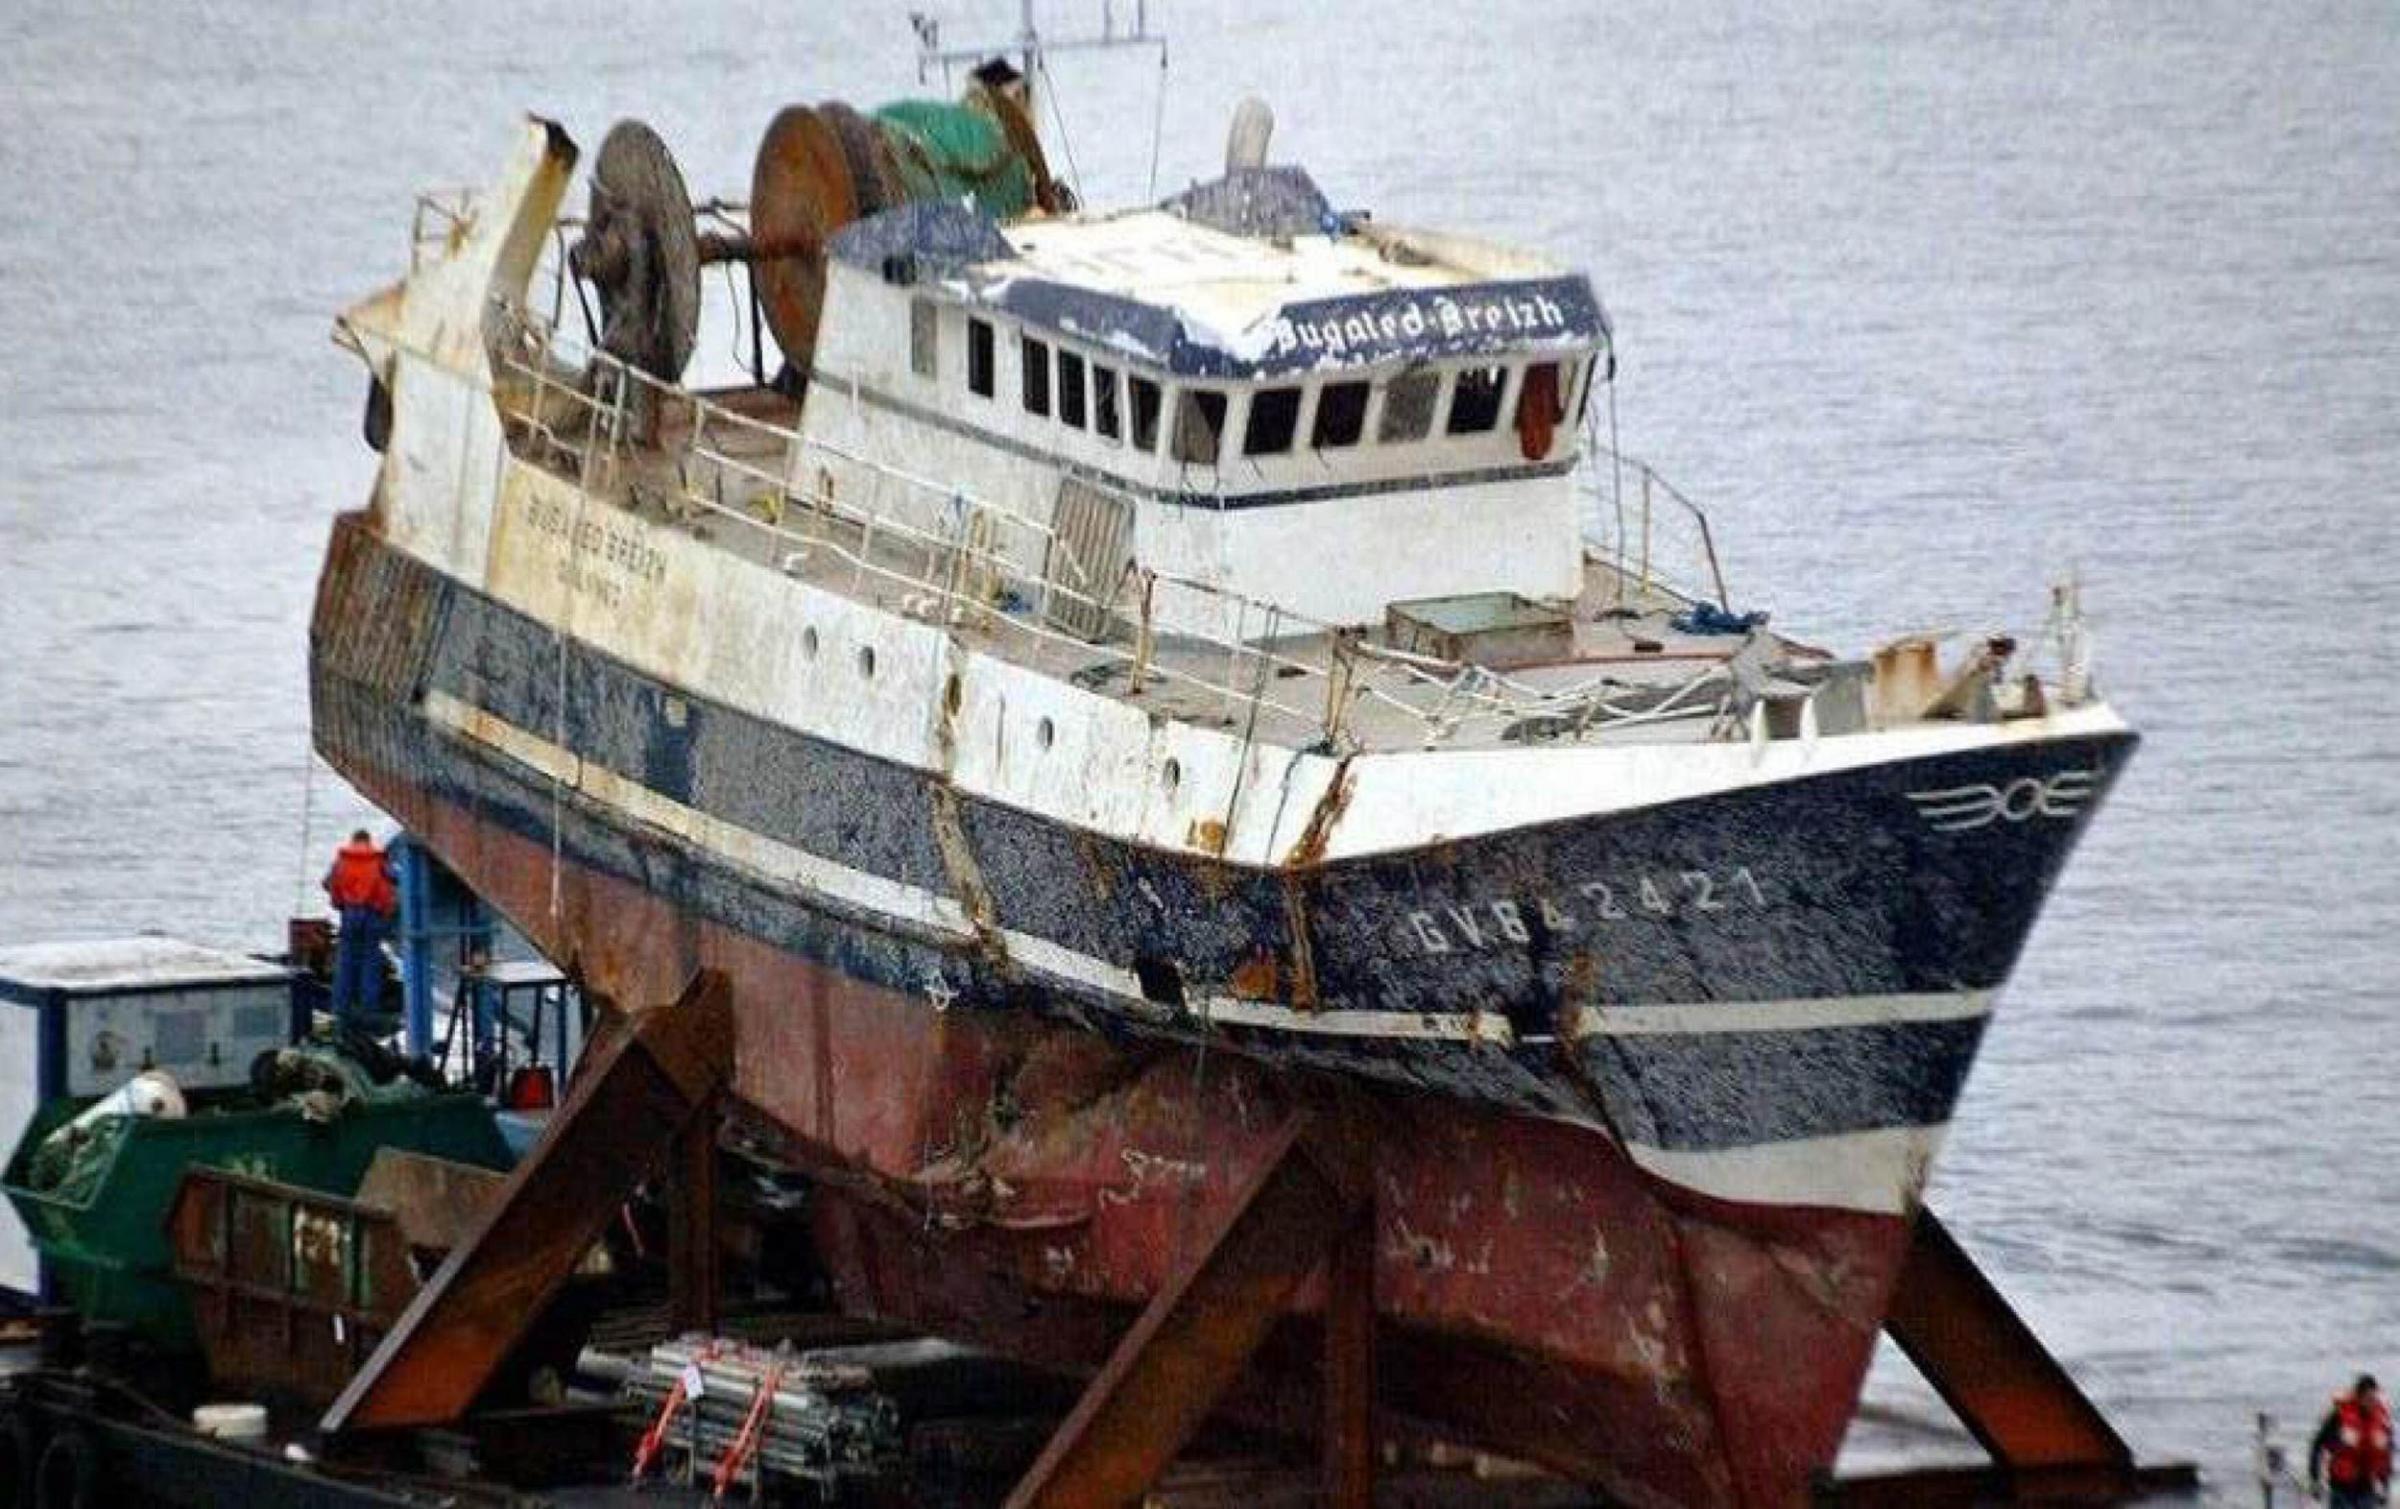 The Bugaled Breizh sank in January 2004 Picture: Field Fisher/PA